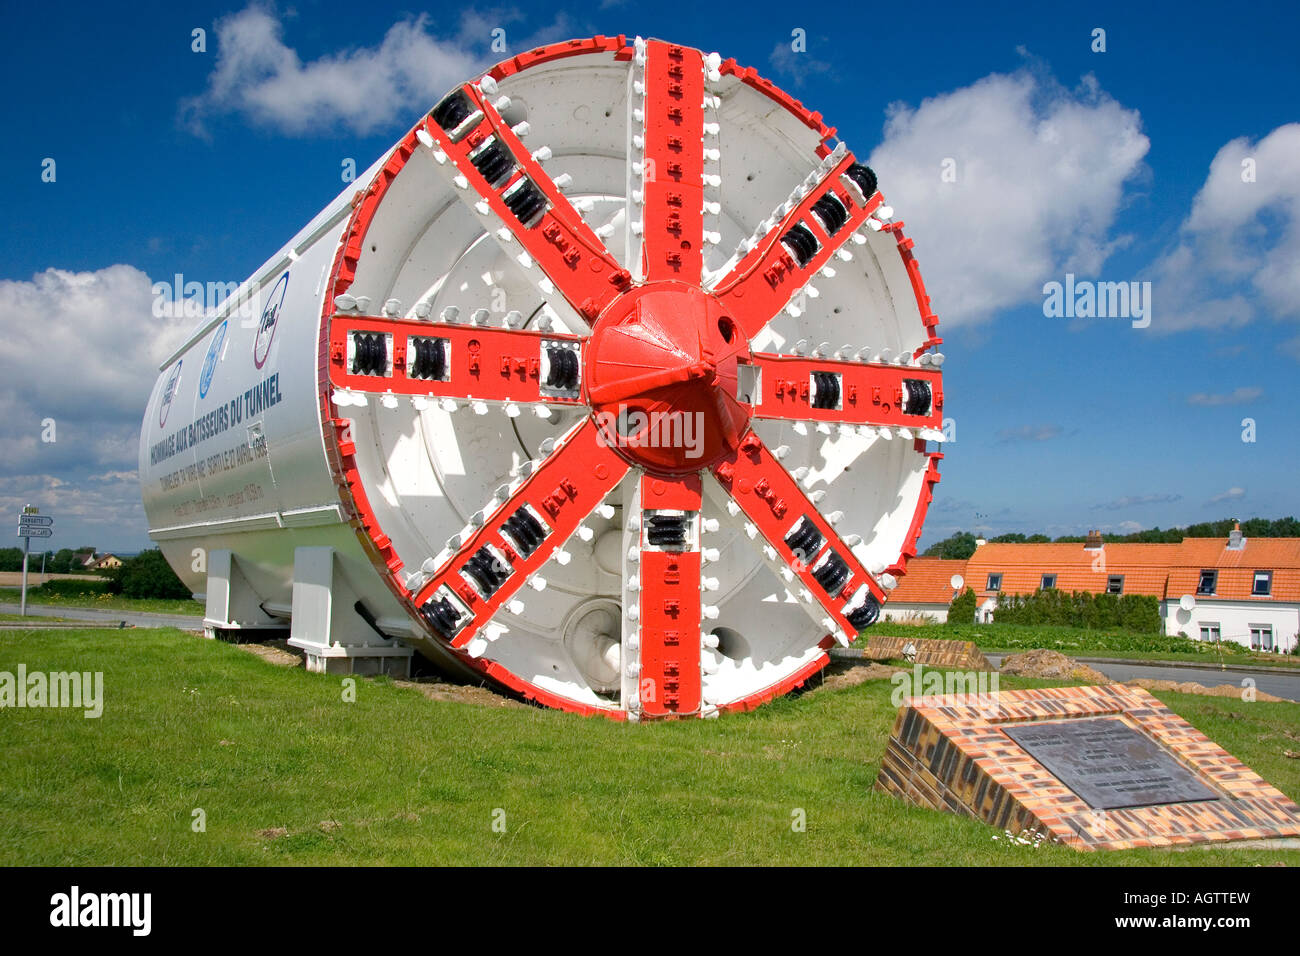 A large boring machine used to cut the tunnel for the Chunnel at Calais in the the department of Pas de Calais France Stock Photo